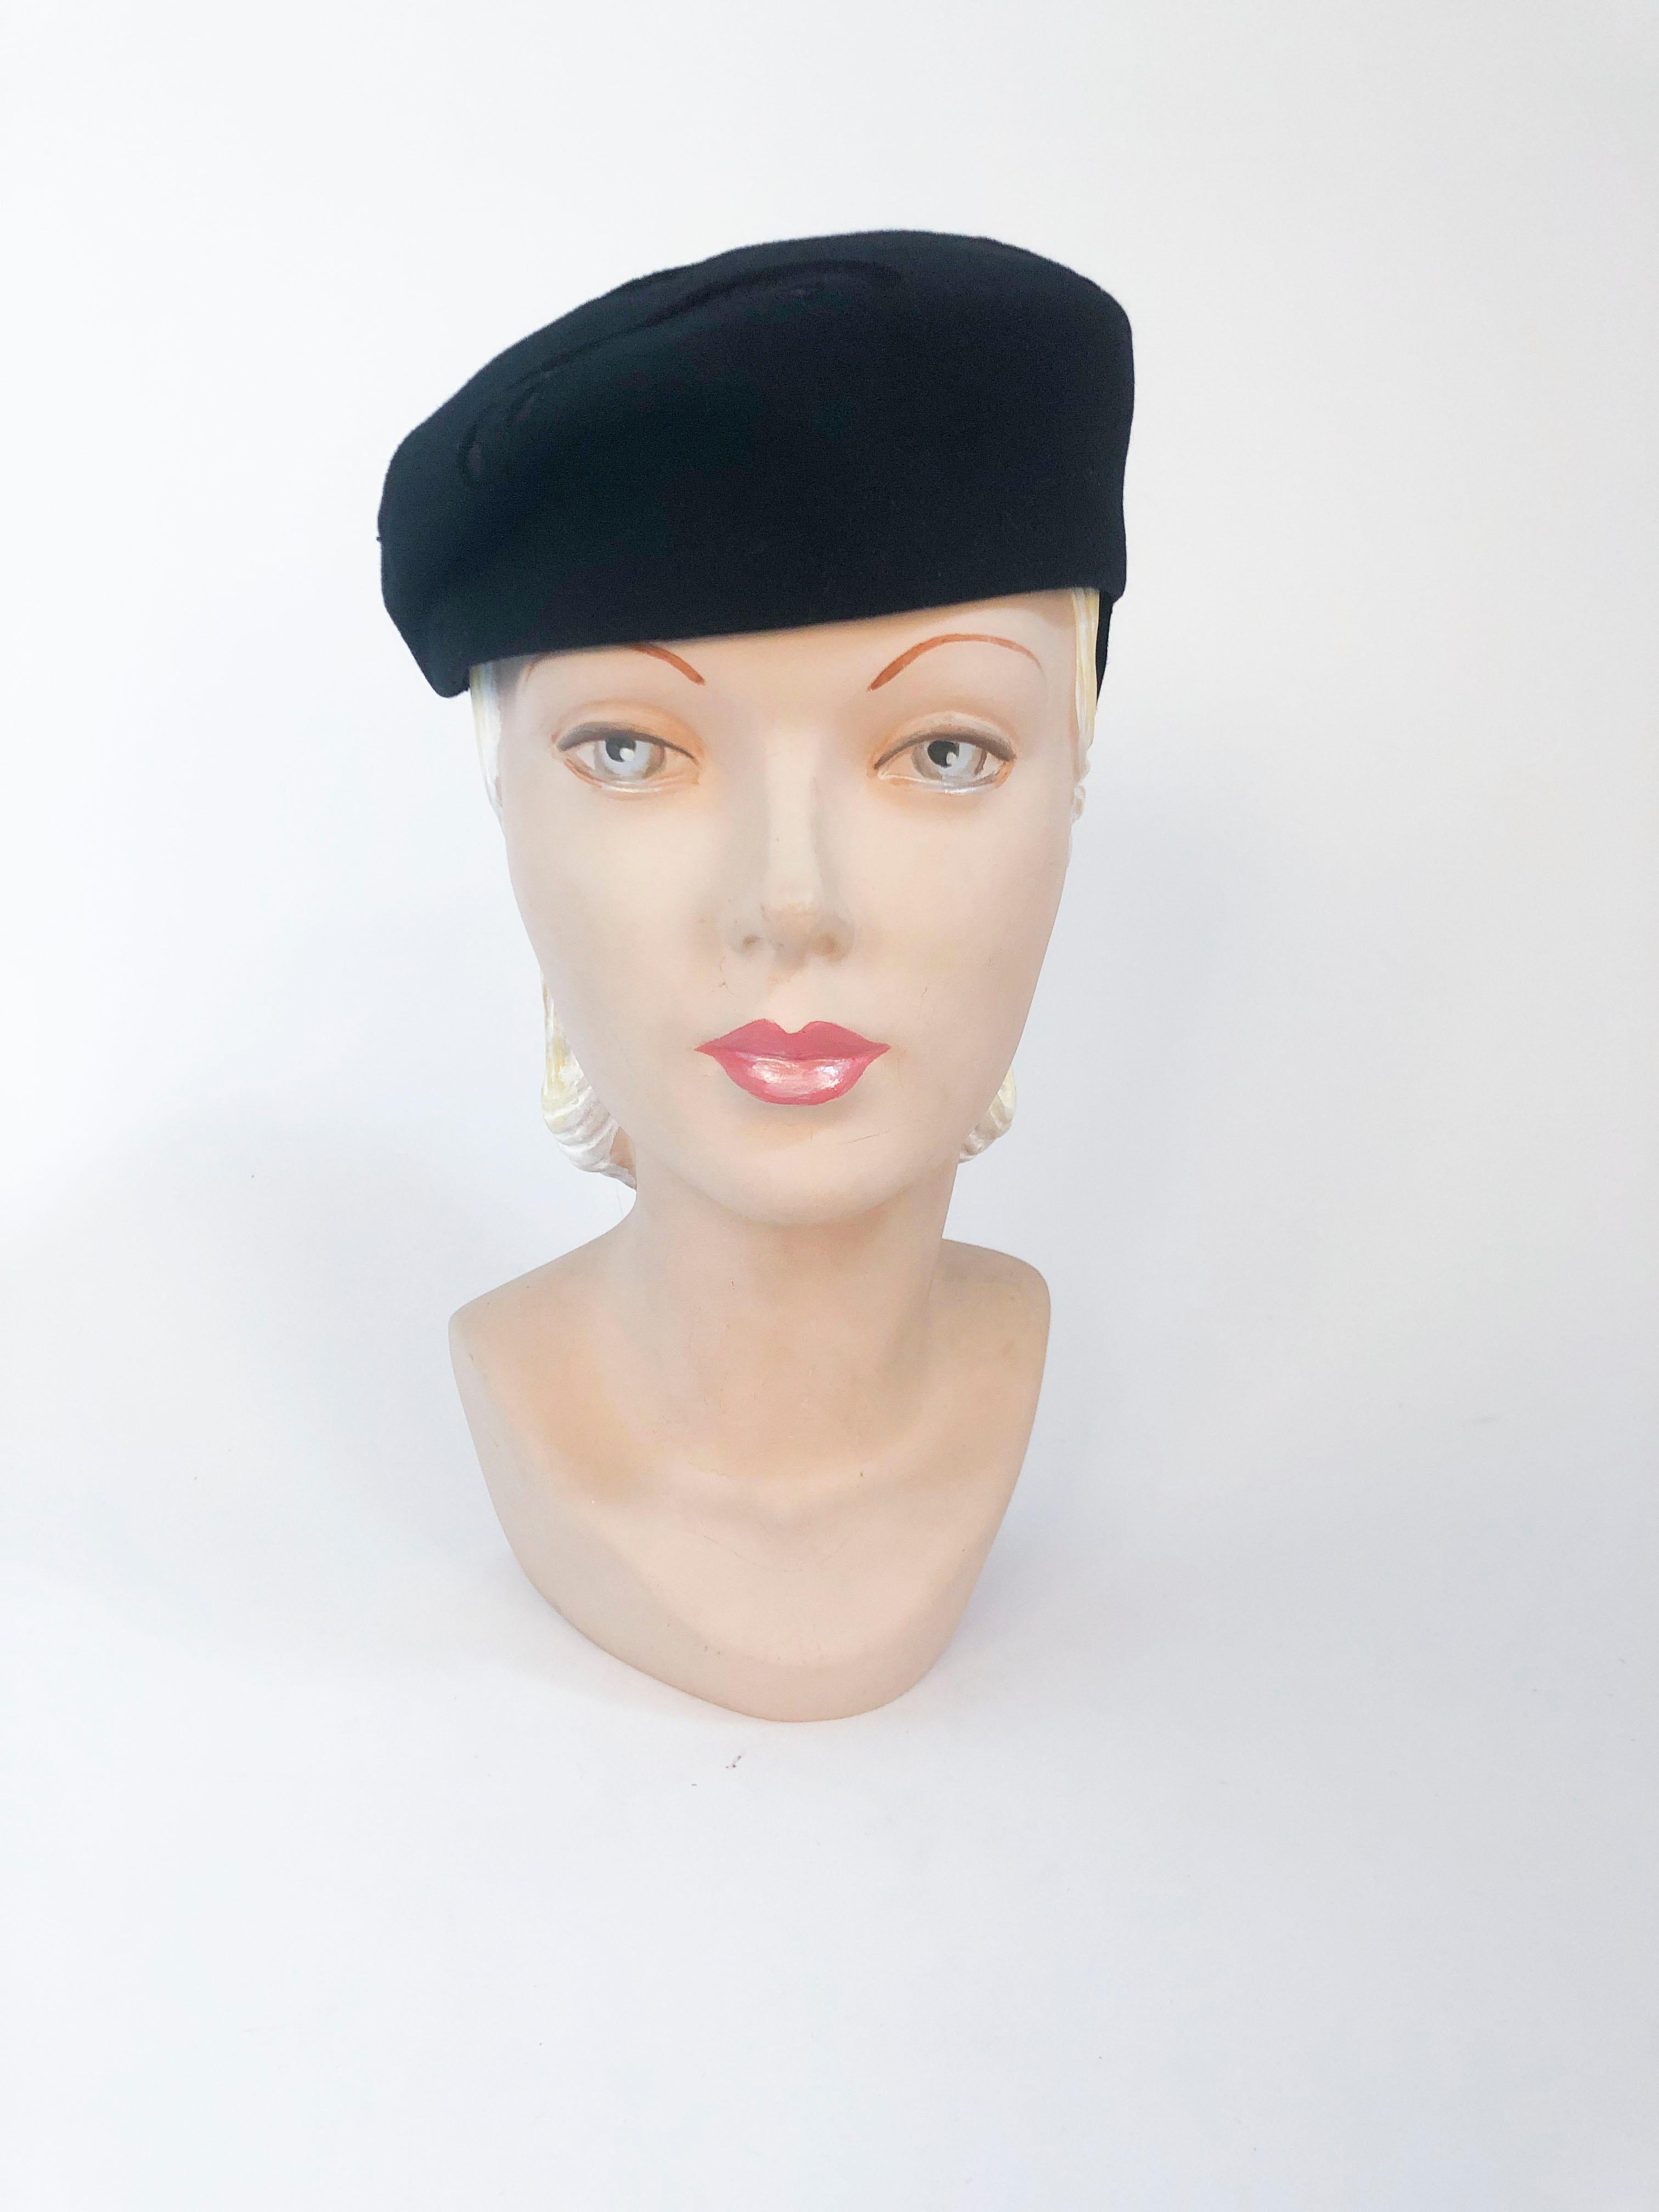 1930s Black Fur Felt Hat With Deco Cut Accent. This hat is structured  like a beret but hat the band in the back to slant it. It also has a small tied bow on the back.